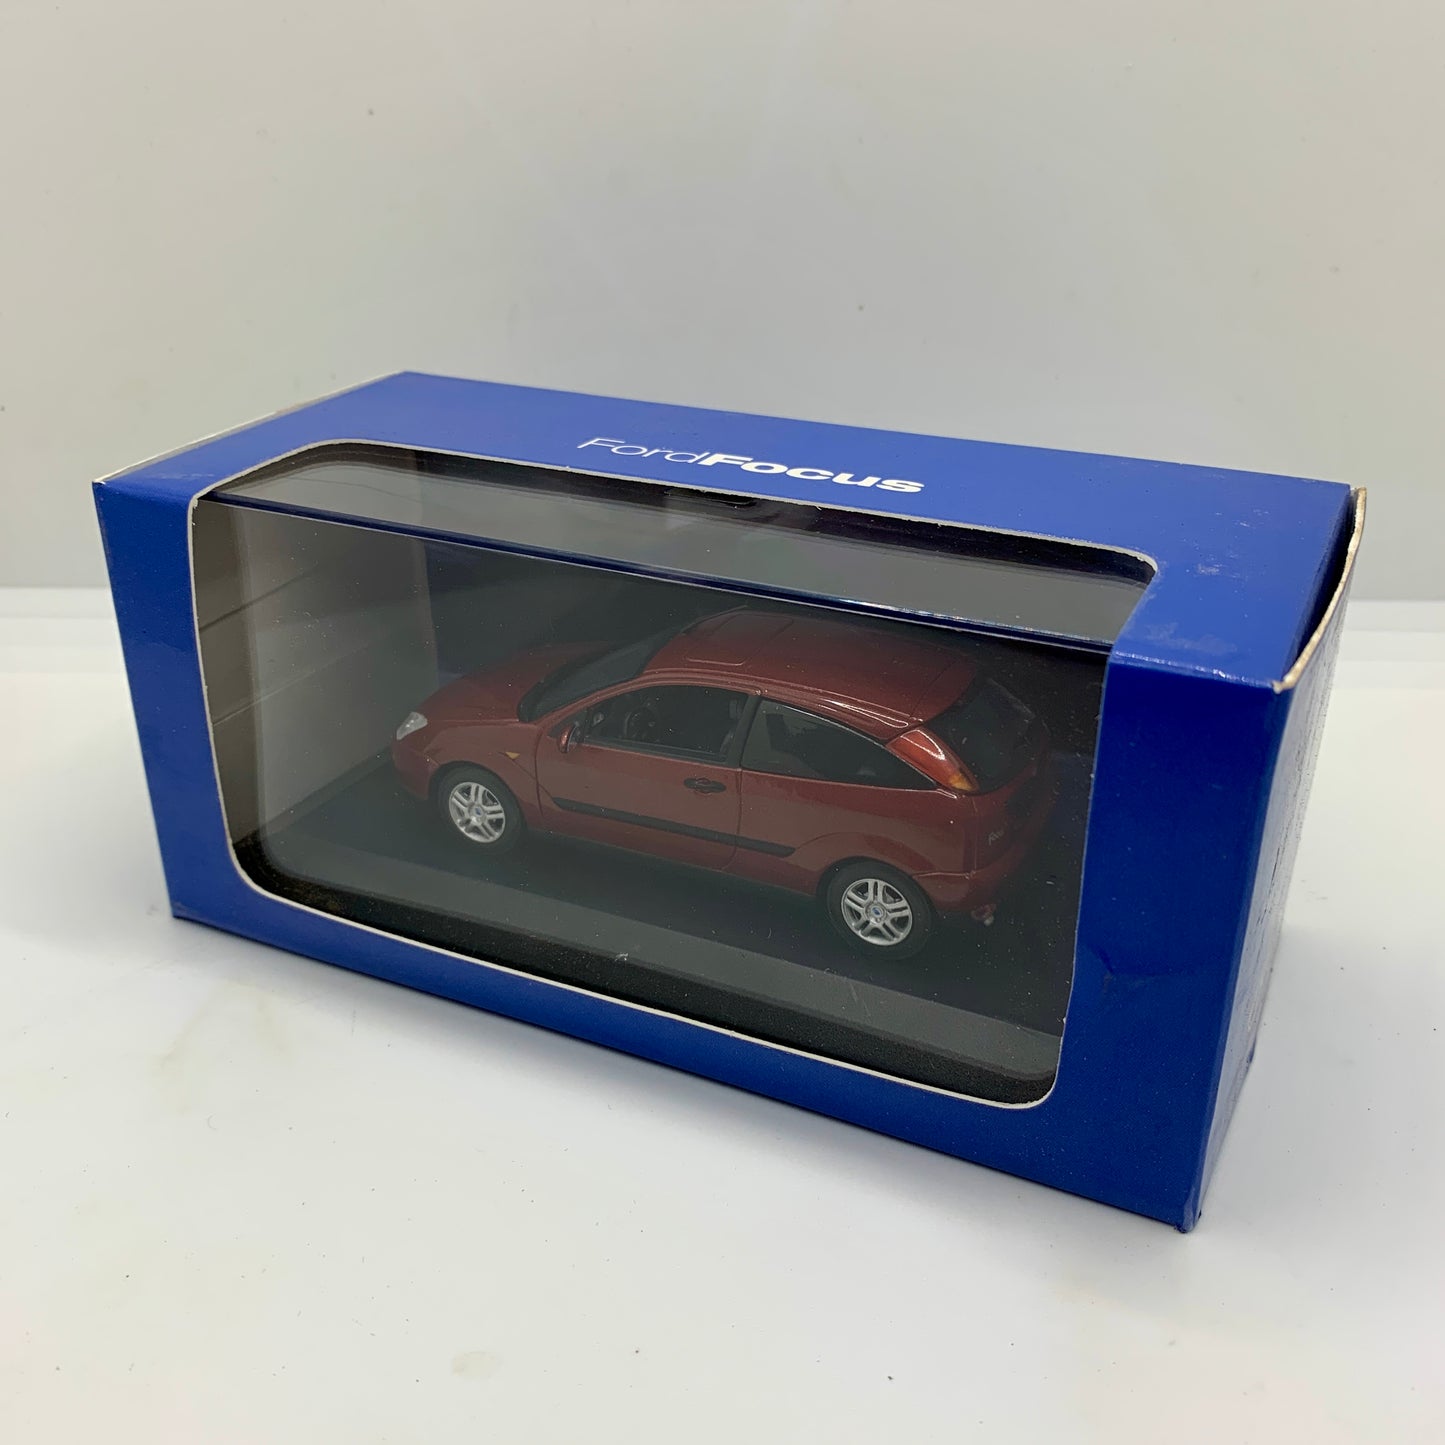 Iconic Ford Focus Collectable Classic Cars 1/43 Scale